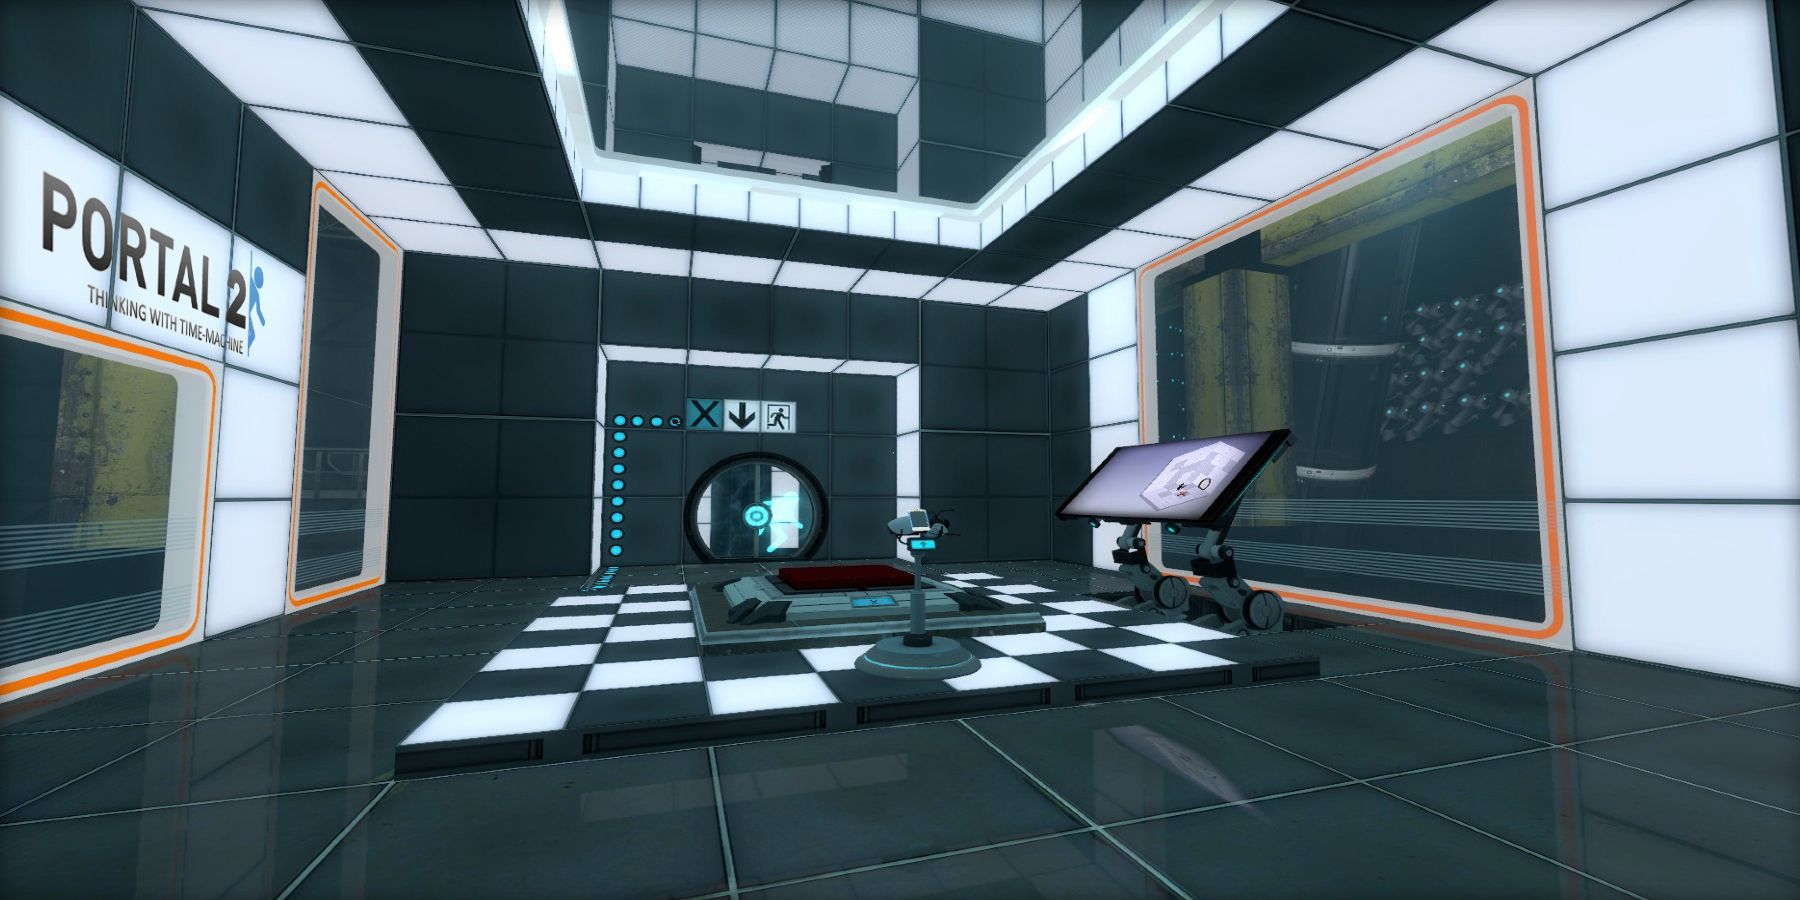 A level in Thinking with Time Machine, a Portal 2 mod